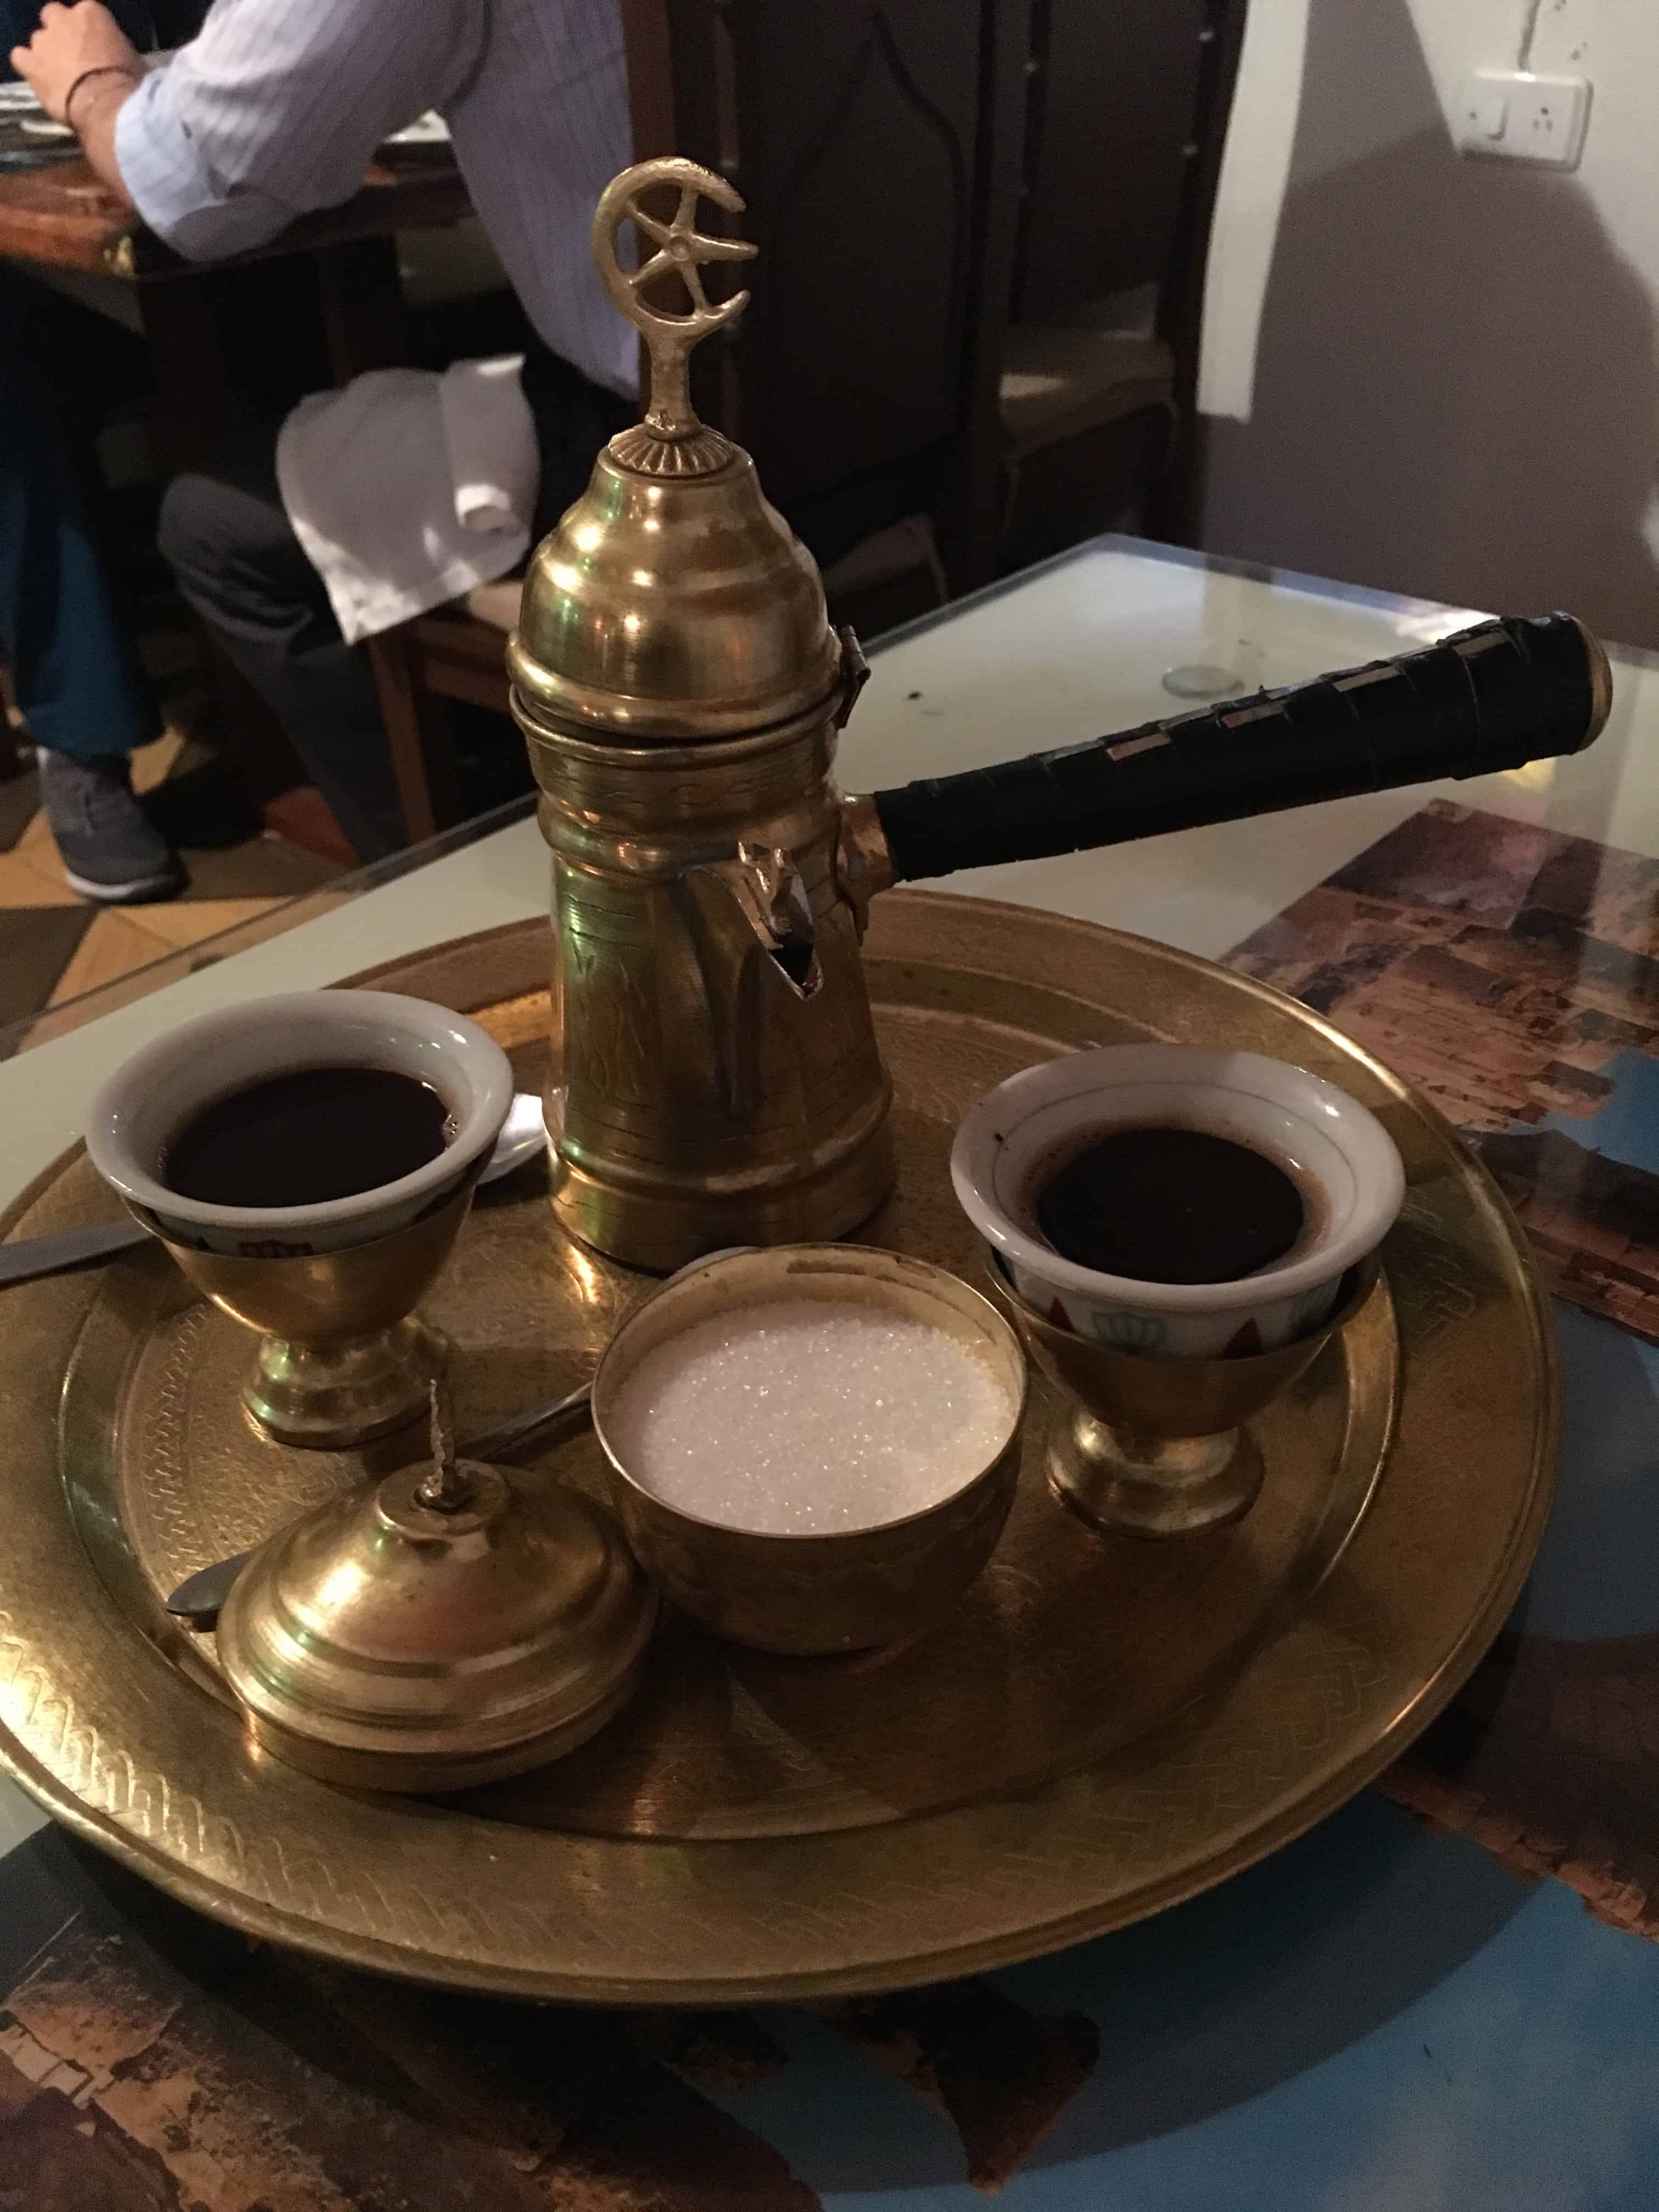 Arabic coffee at Litany in Cali, Colombia